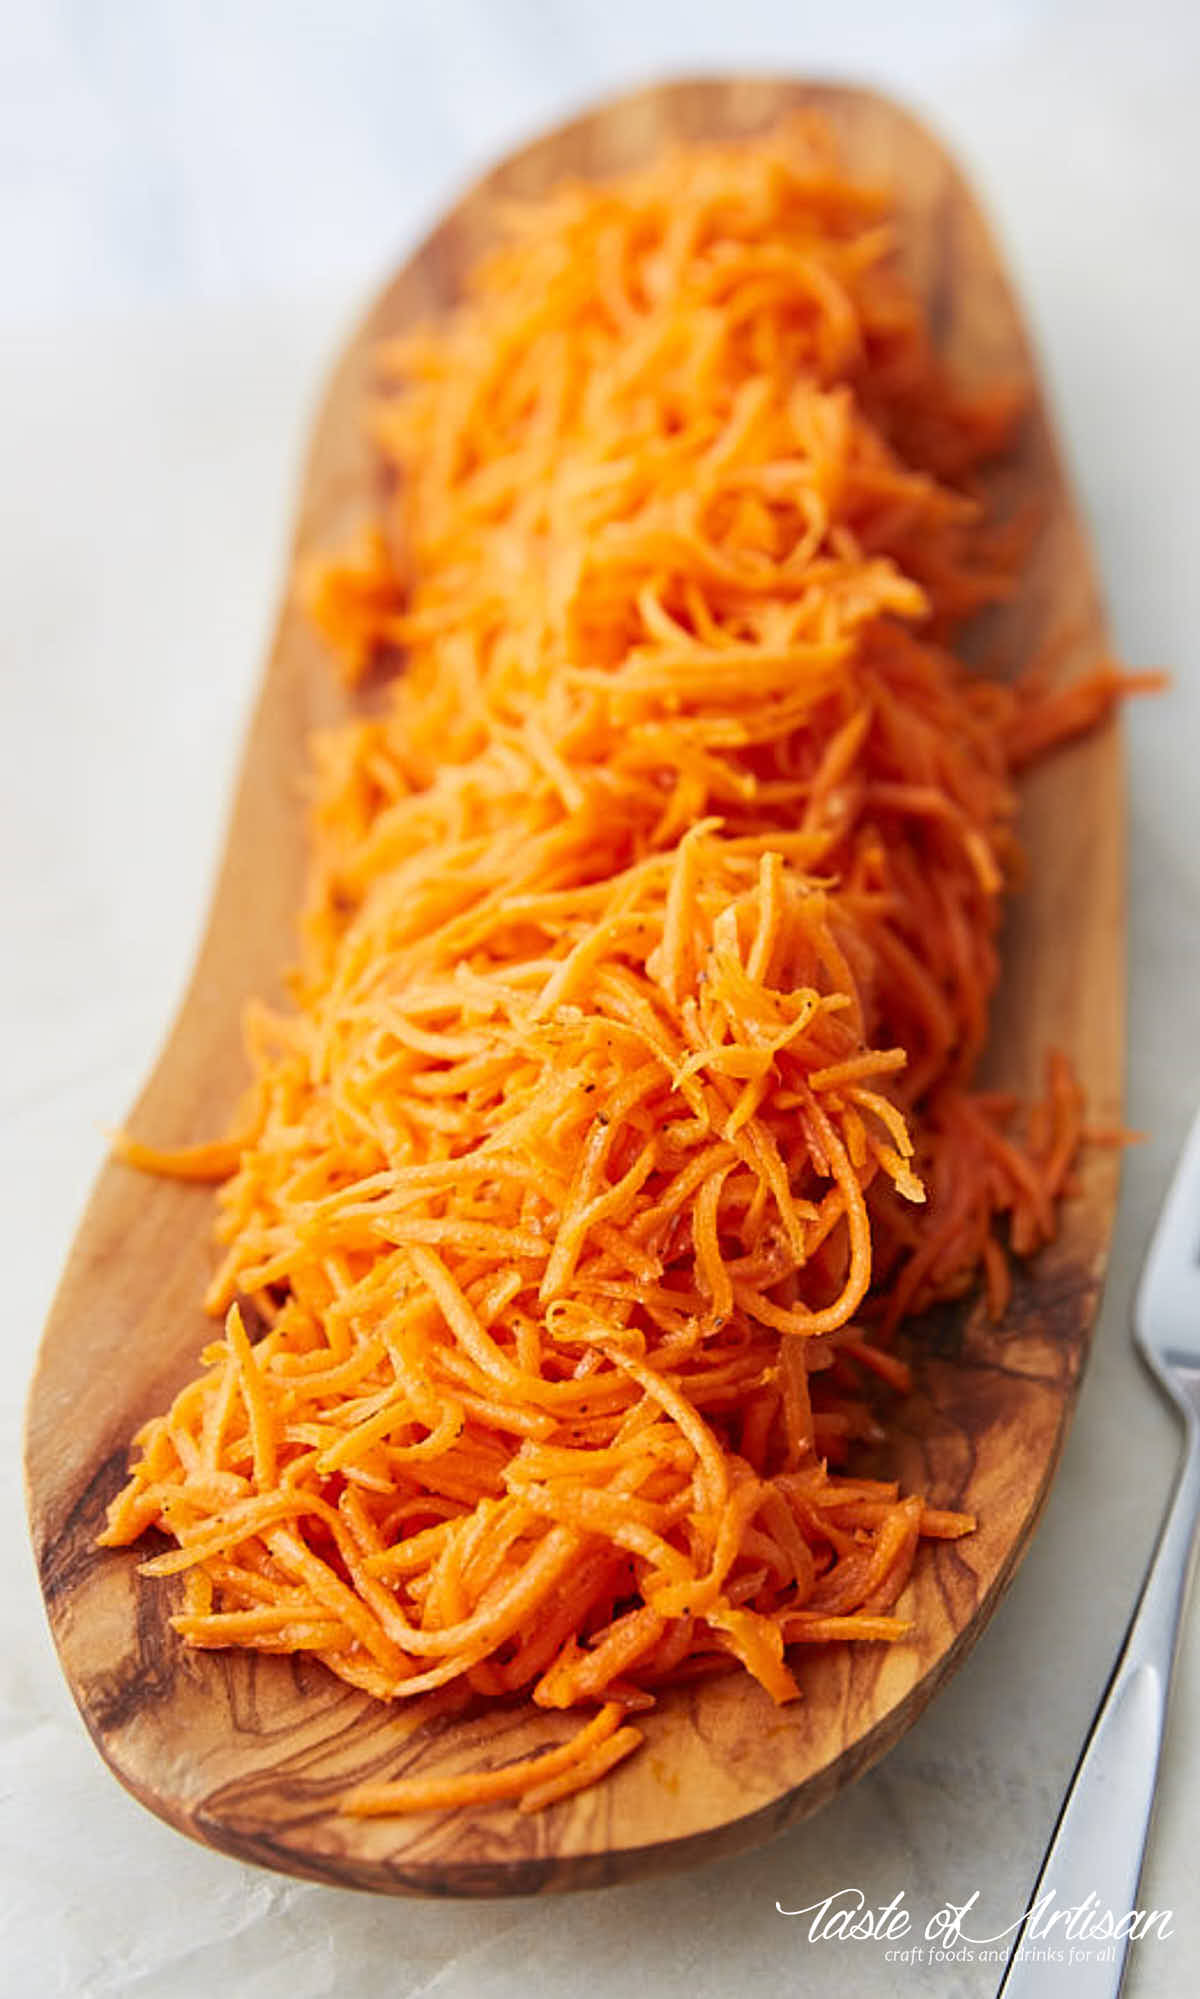 Marinated carrots on a wooden serving platter.